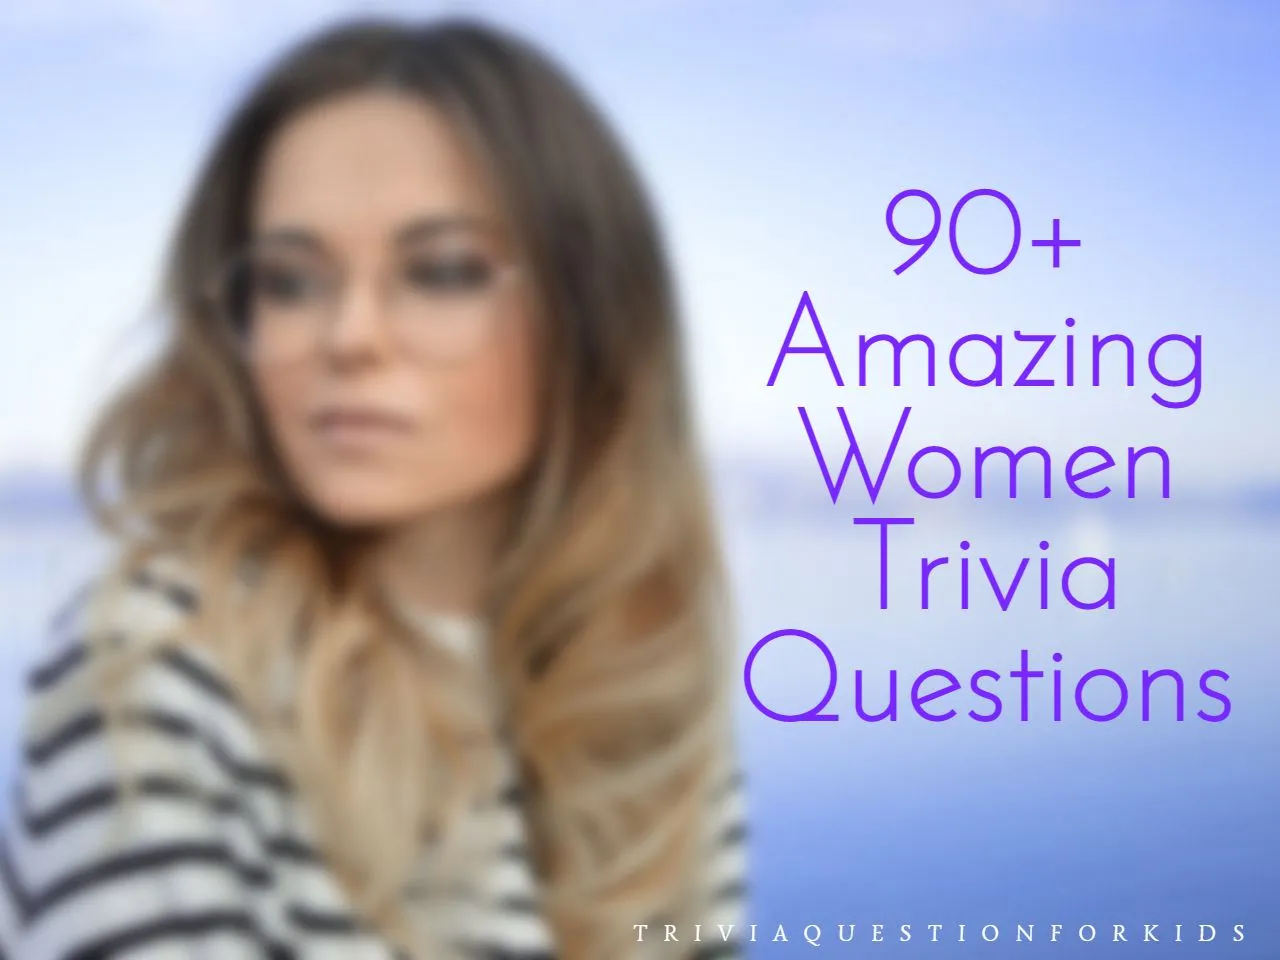 Women Trivia Questions And Answers 